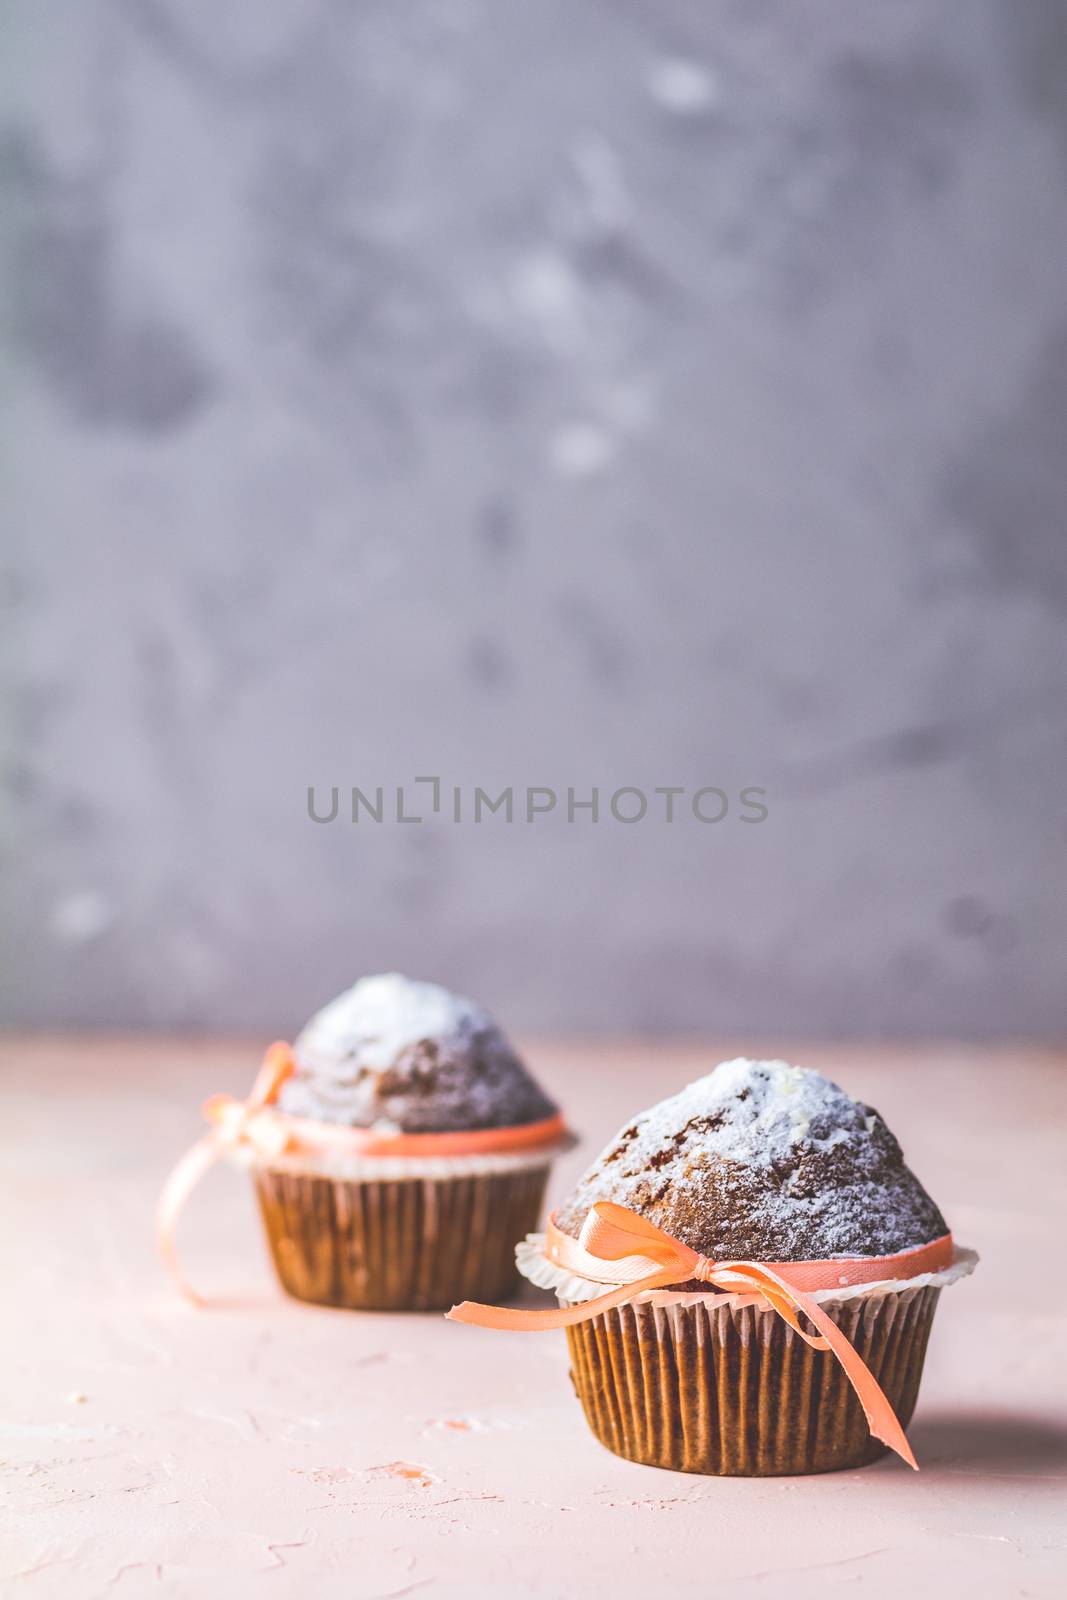 Tasty delicious homemade muffin on light pink living coral stone concrete surface, beautiful sweet food, copy space.